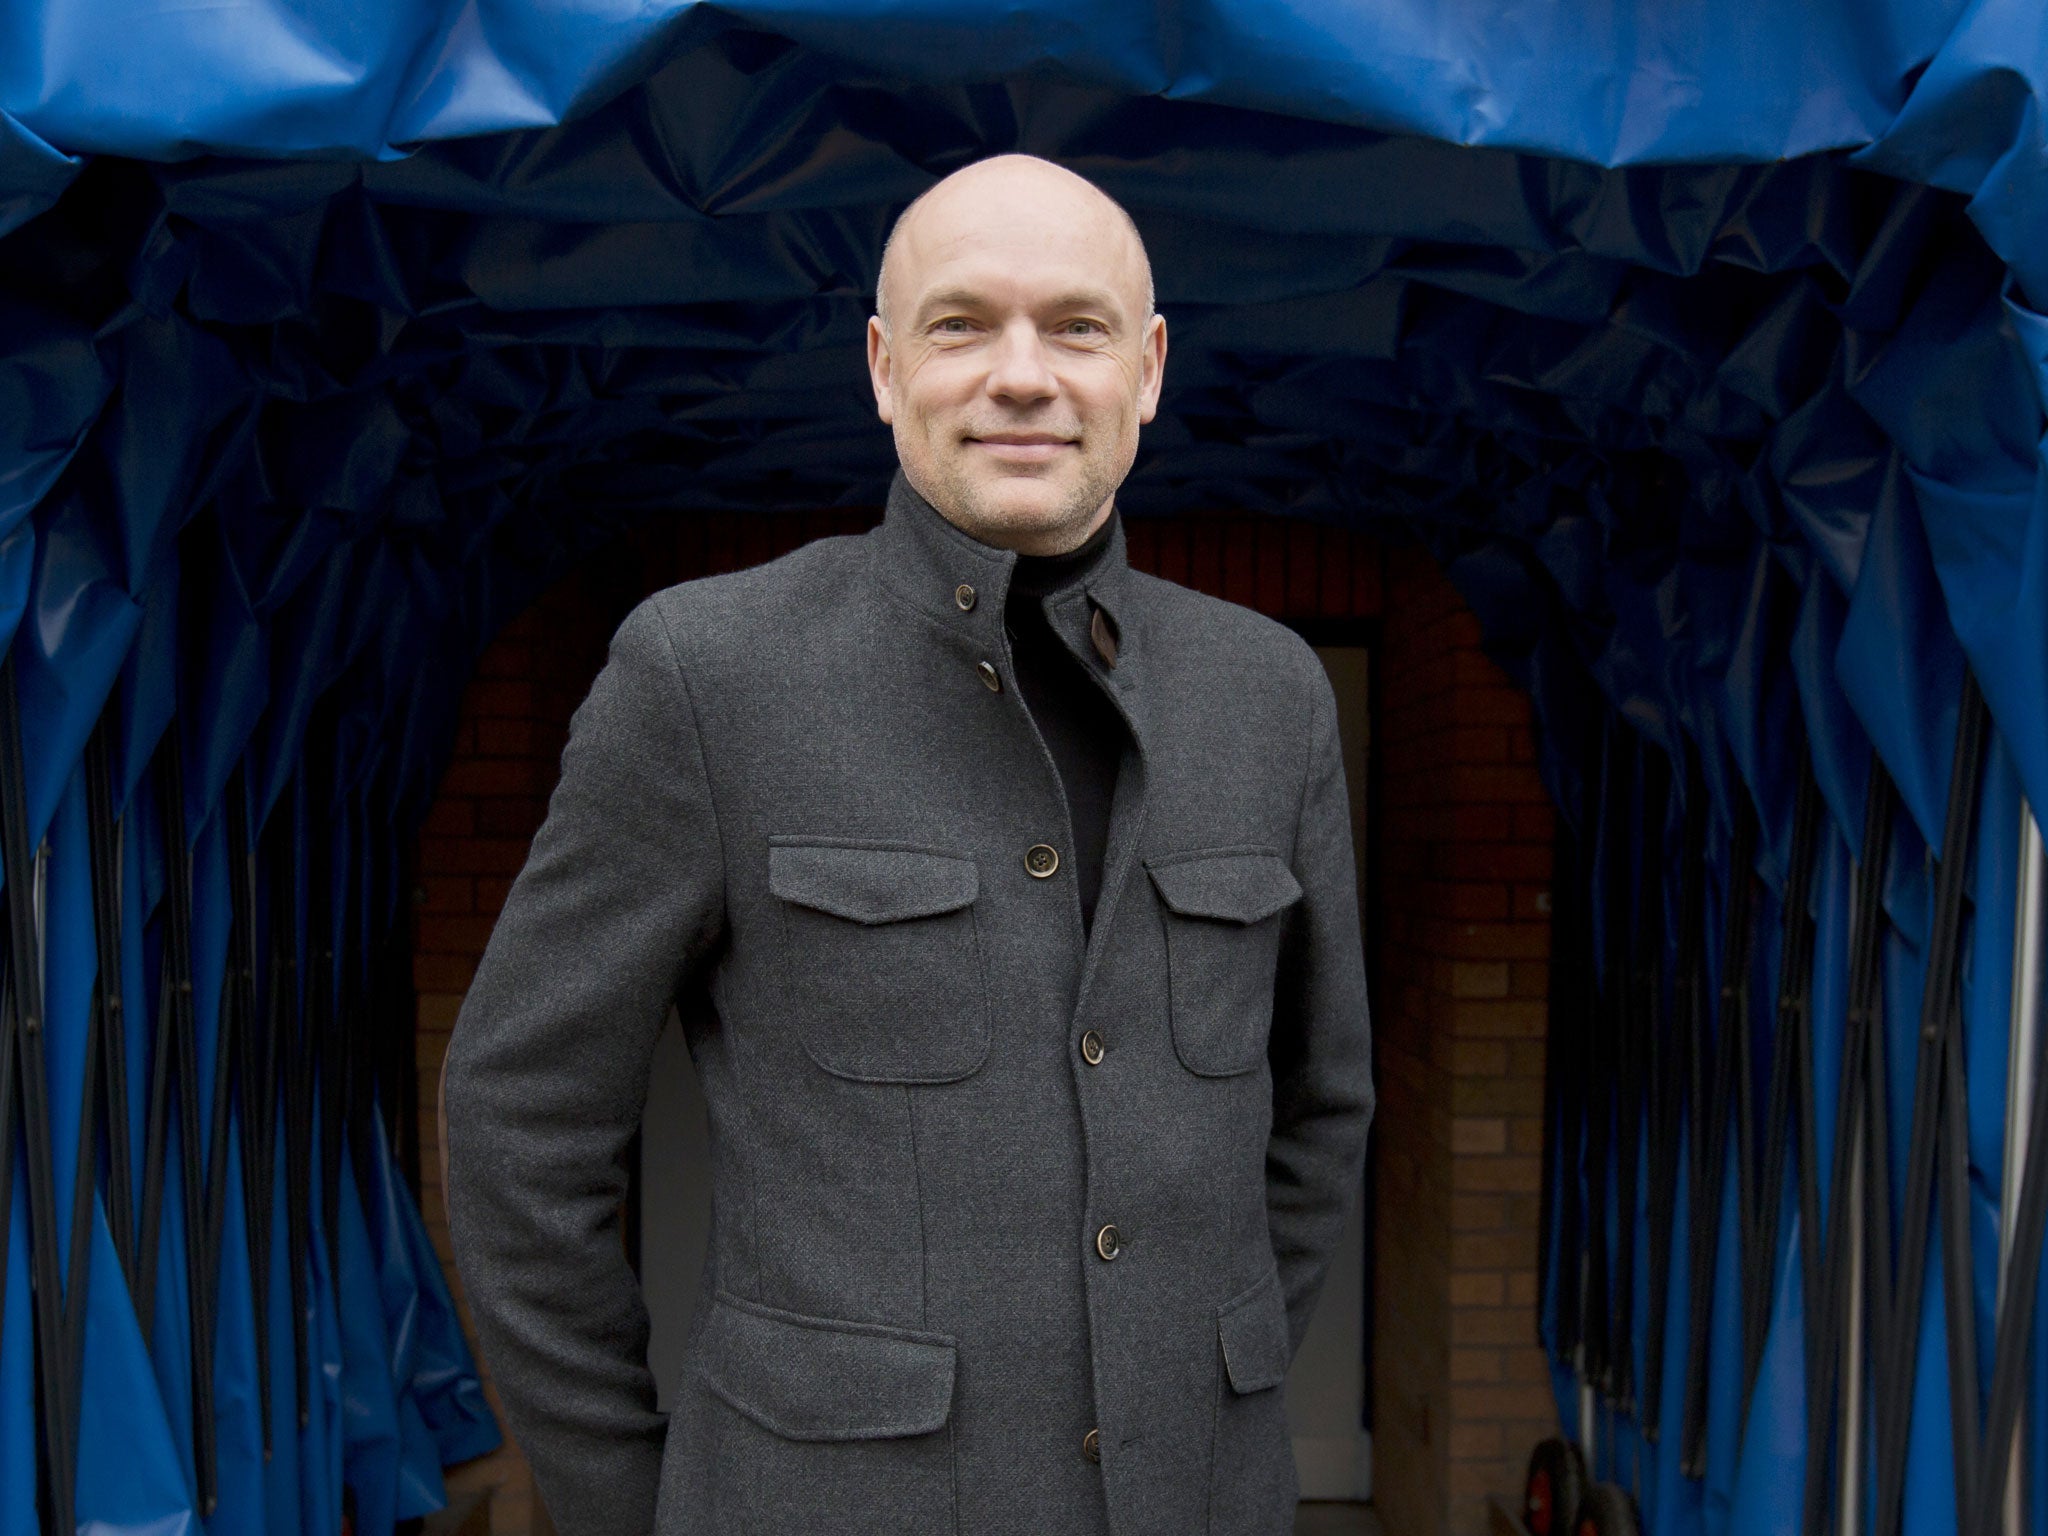 Uwe Rösler at the mouth of the Wigan tunnel